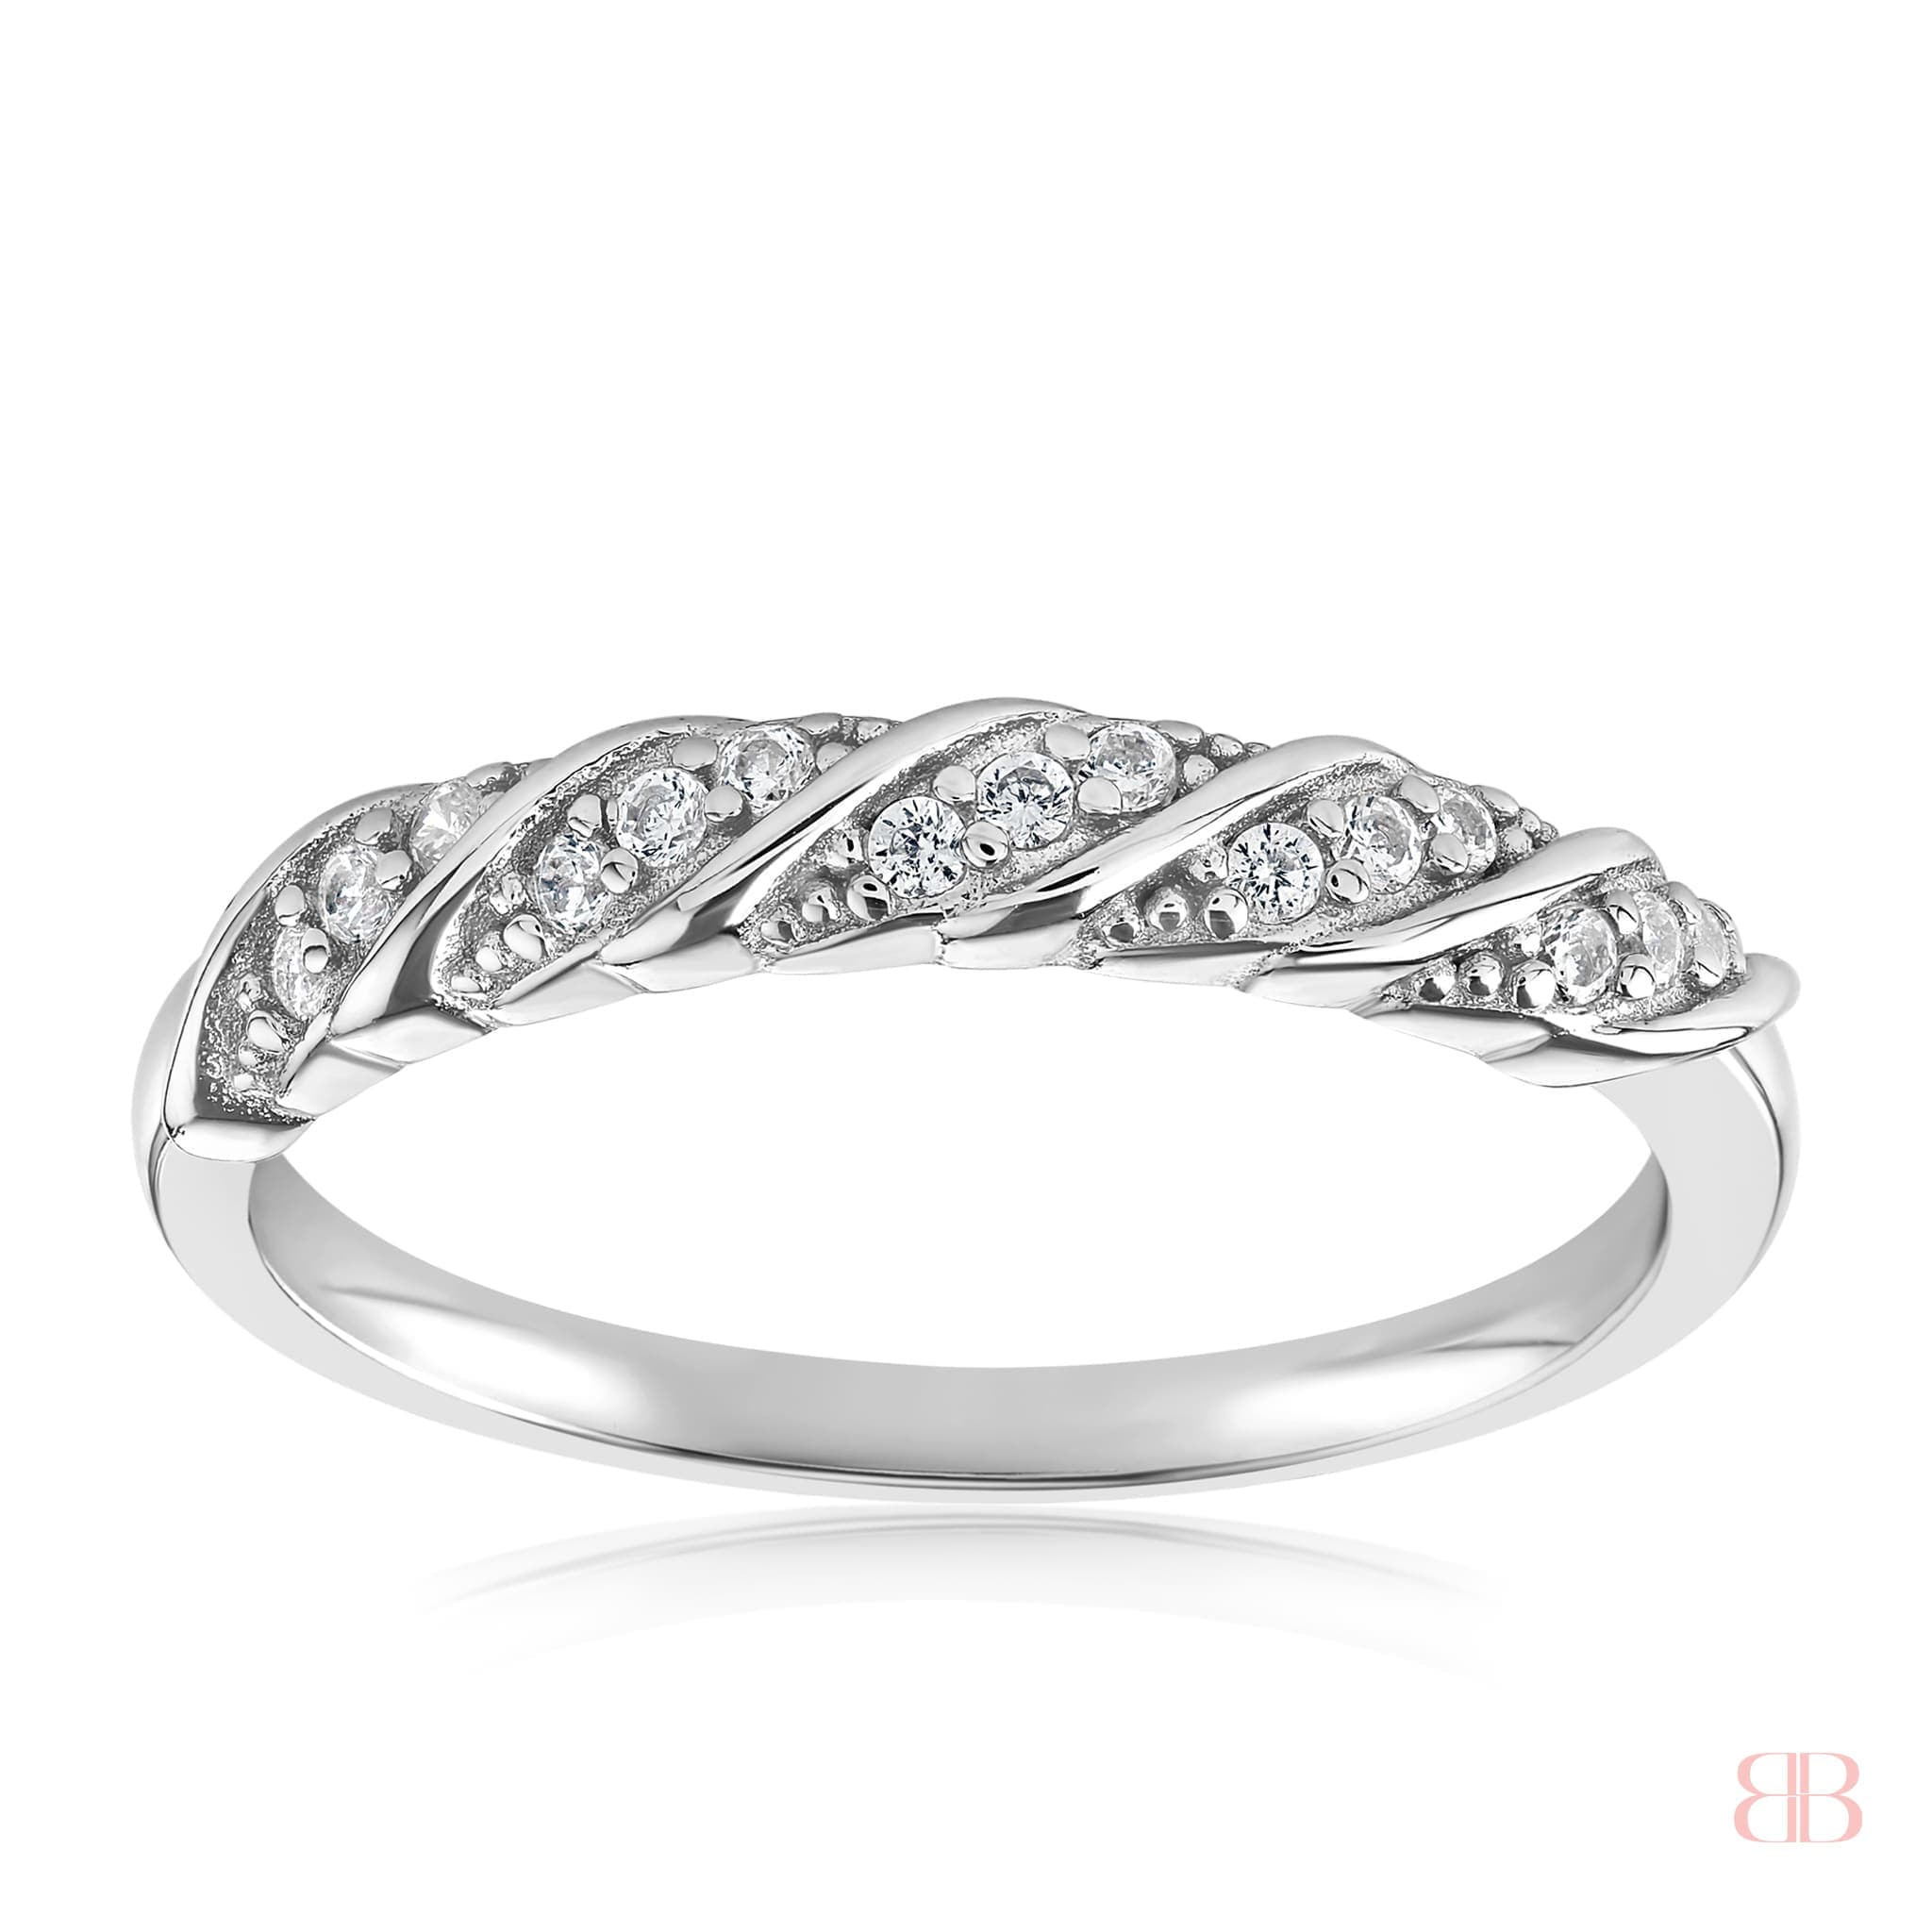 Details about  / 925 Sterling Silver Ring Women/'s Braided Rose Flower Beautiful Fashion